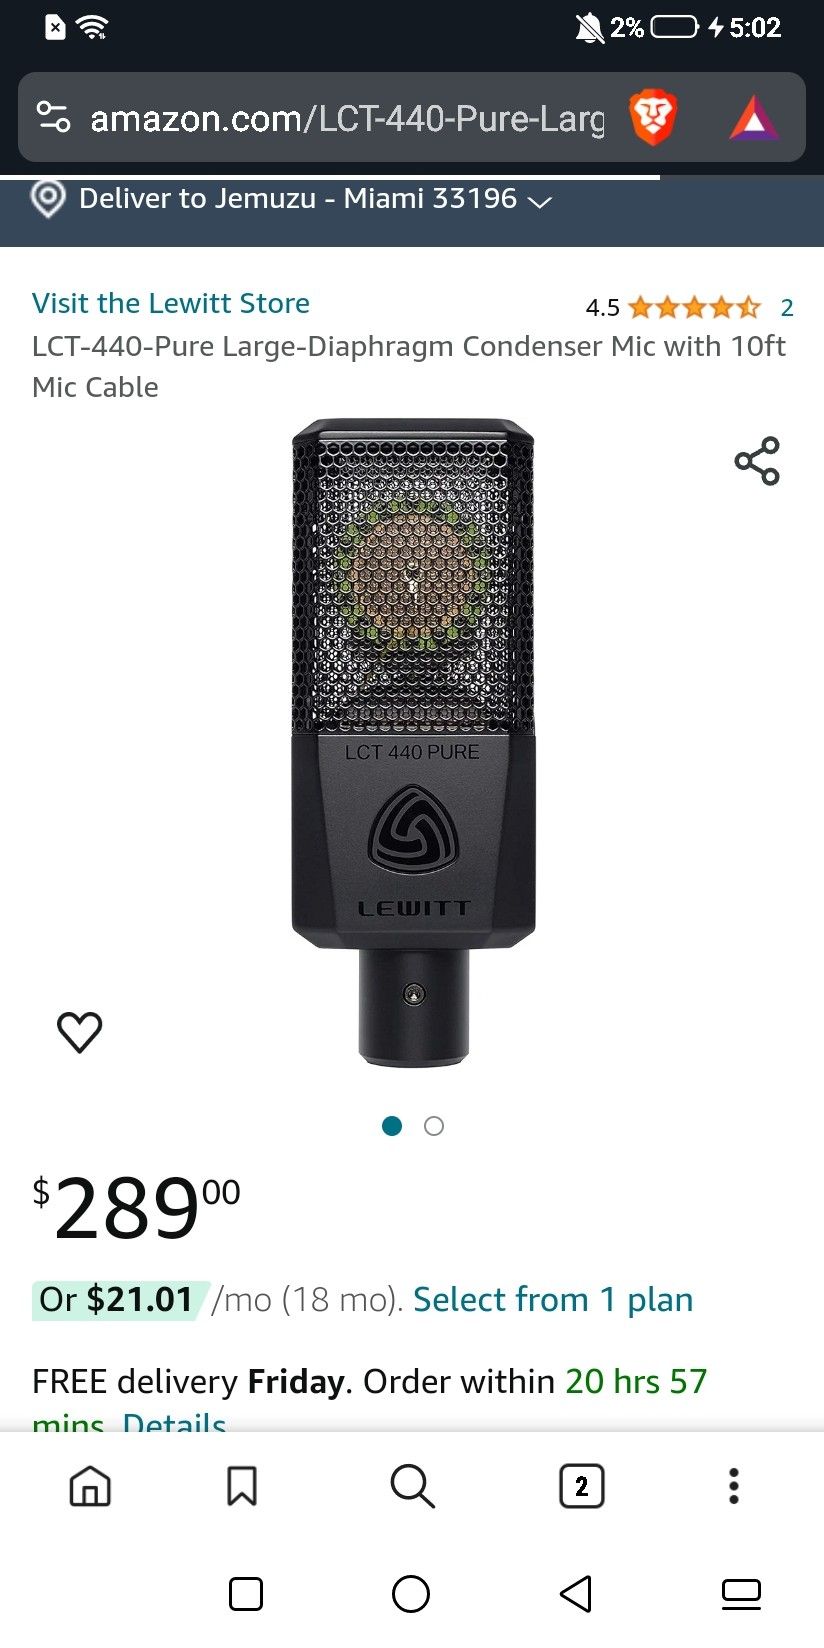 Lewitt Condenser Microphone | Microfono  Condensador | Vocals or recording of Piano / Guitars / Bass Amplifiers  w XLR Cable LCT 440 Pure (Best Offer)